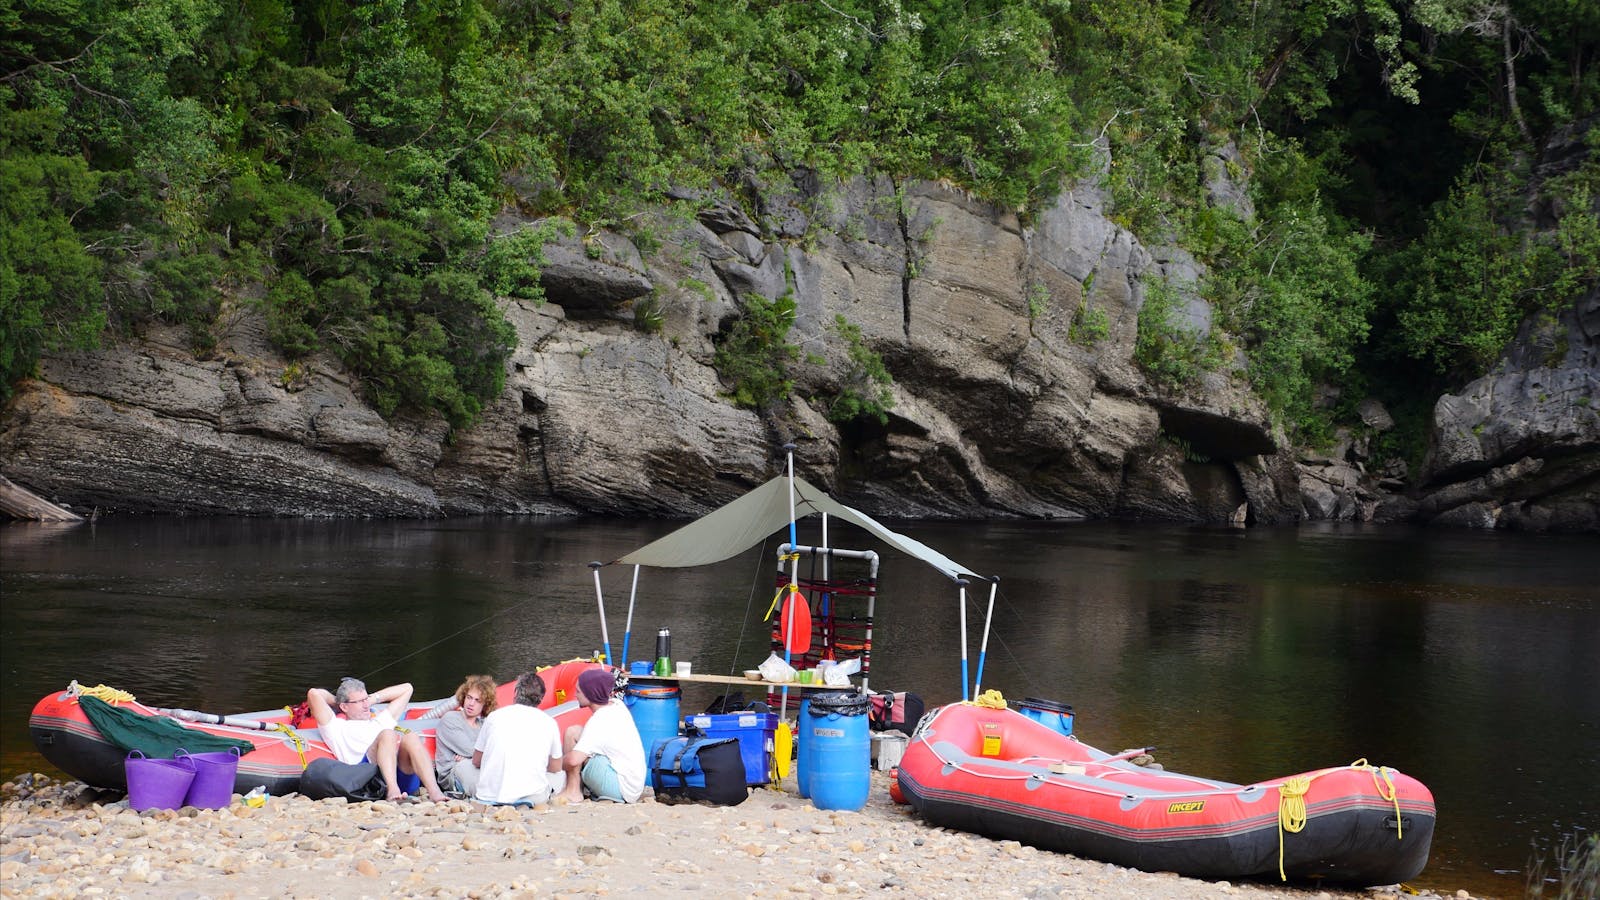 The Beach campsite on the lower Franklin River